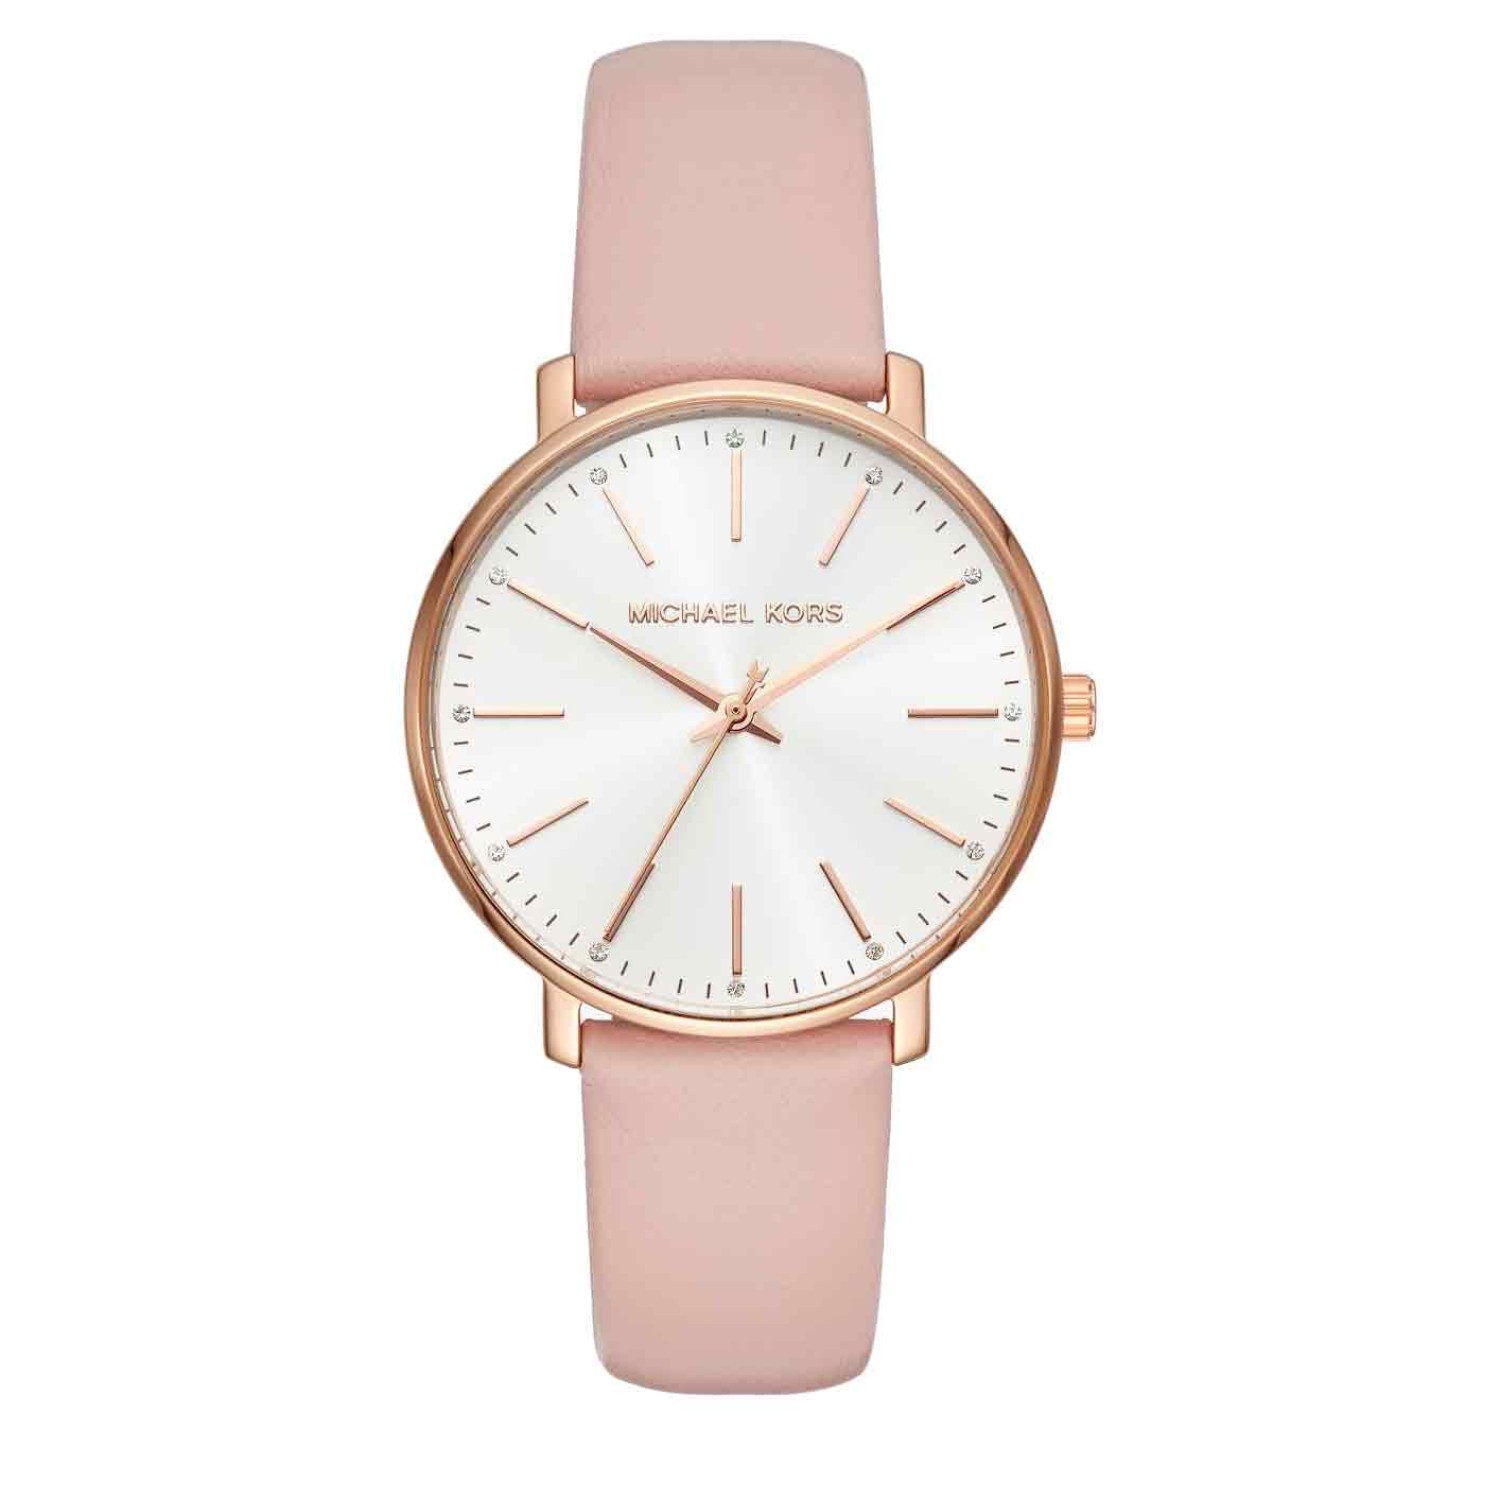 MK2741 Michael Kors Pyper Rose Gold Tone Leather Watch. Michael Kors Pyper watch is the definition of everyday elegance. Designed with a smooth leather strap, this rose gold-tone style features a minimalist watch face. Wear it solo or stack it with coordi